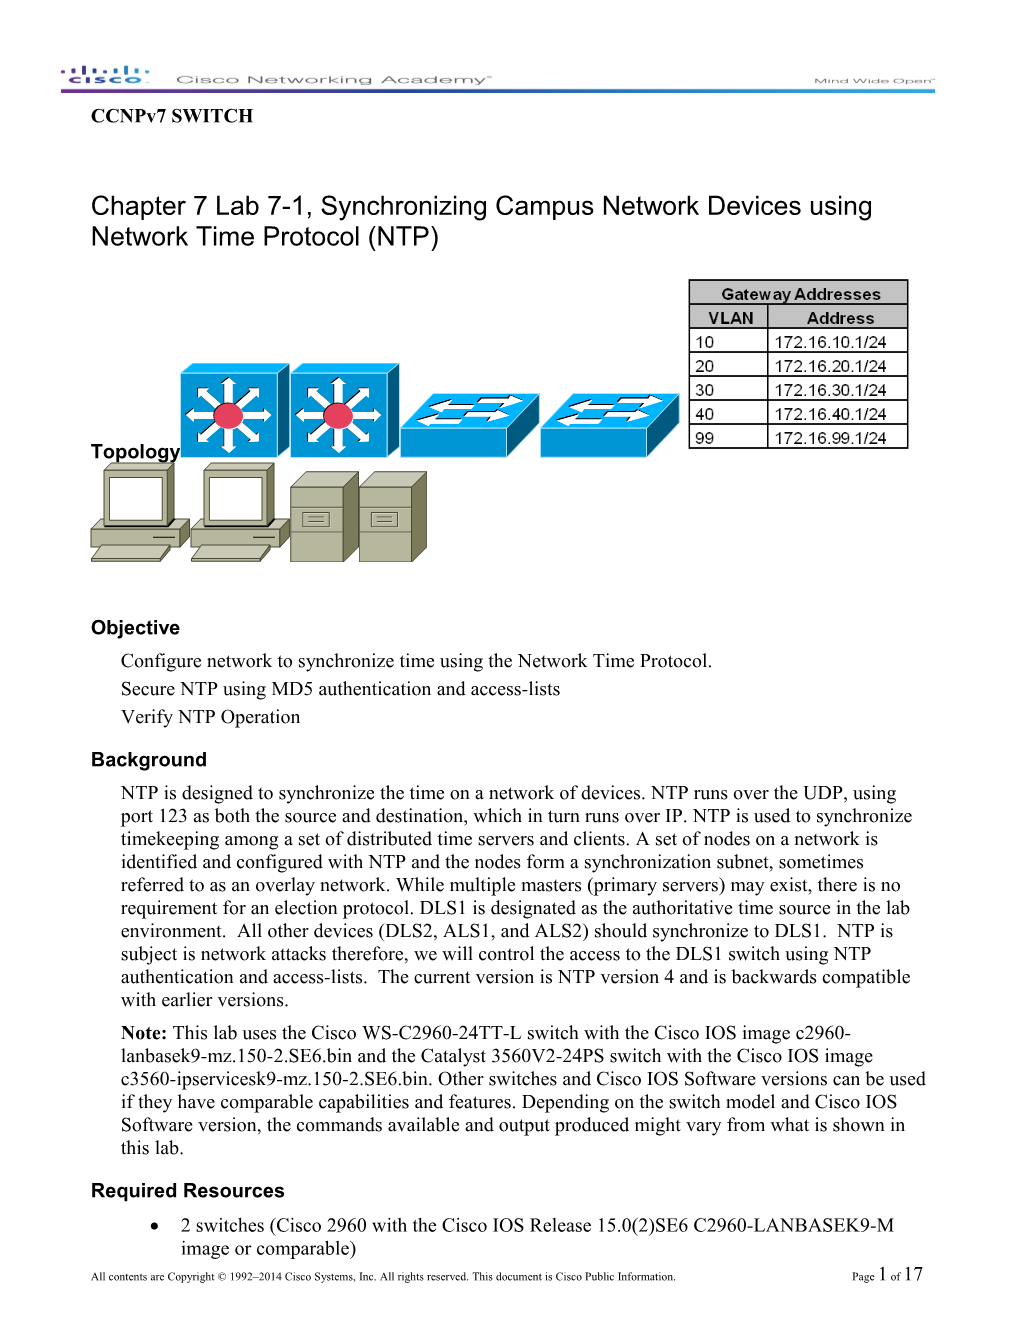 Ccnpv7 Chapter 7 Lab 7-1, Configuring NTP